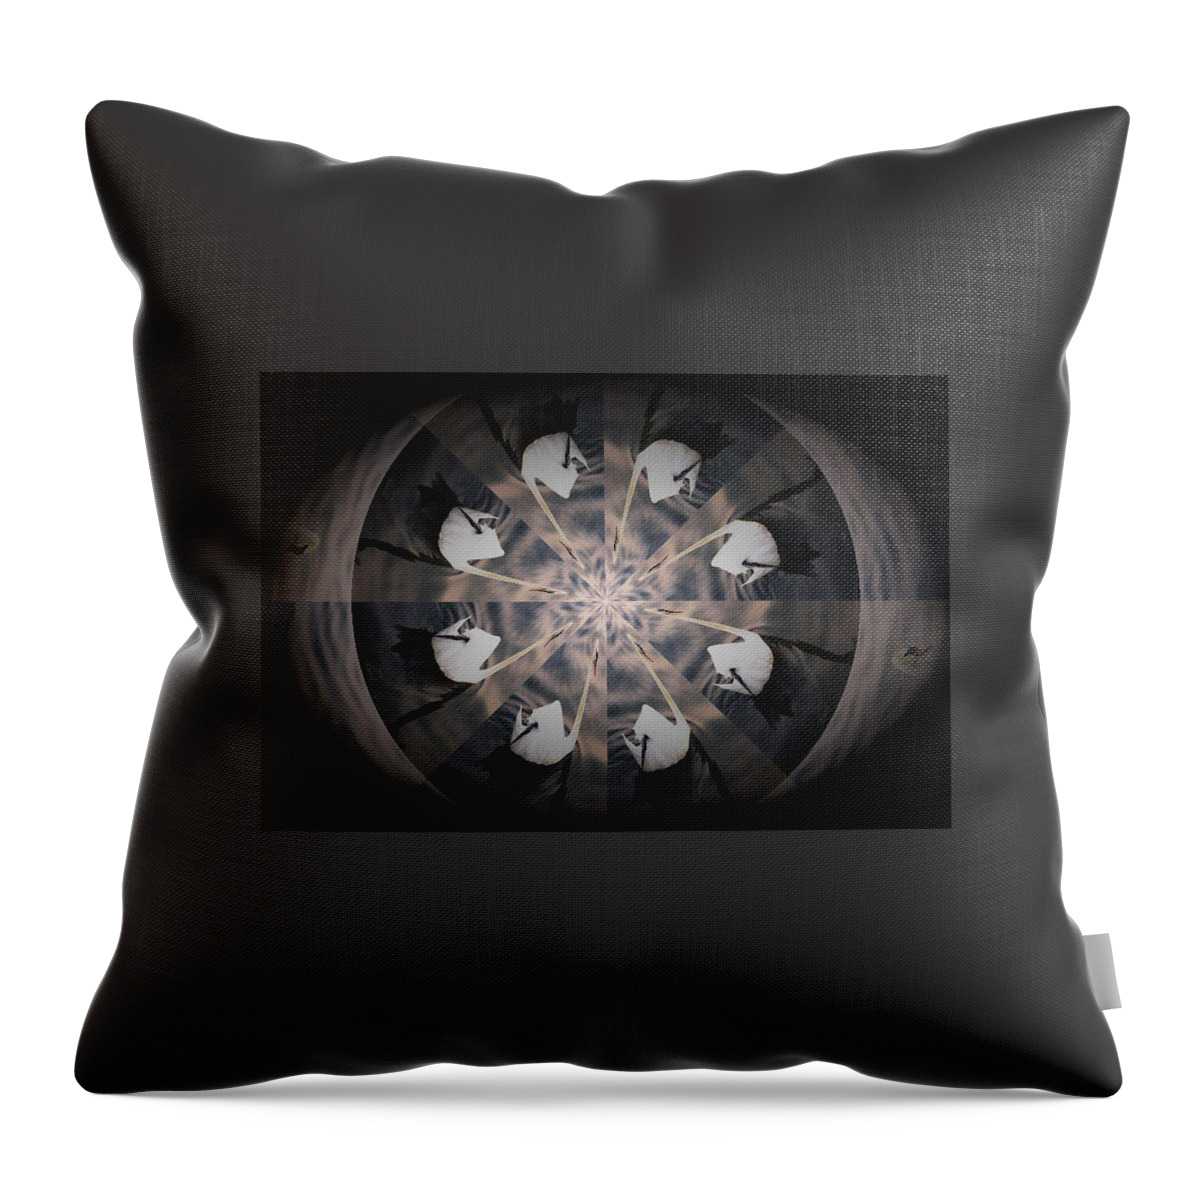 Birds Throw Pillow featuring the digital art Swan Eye by Ee Photography